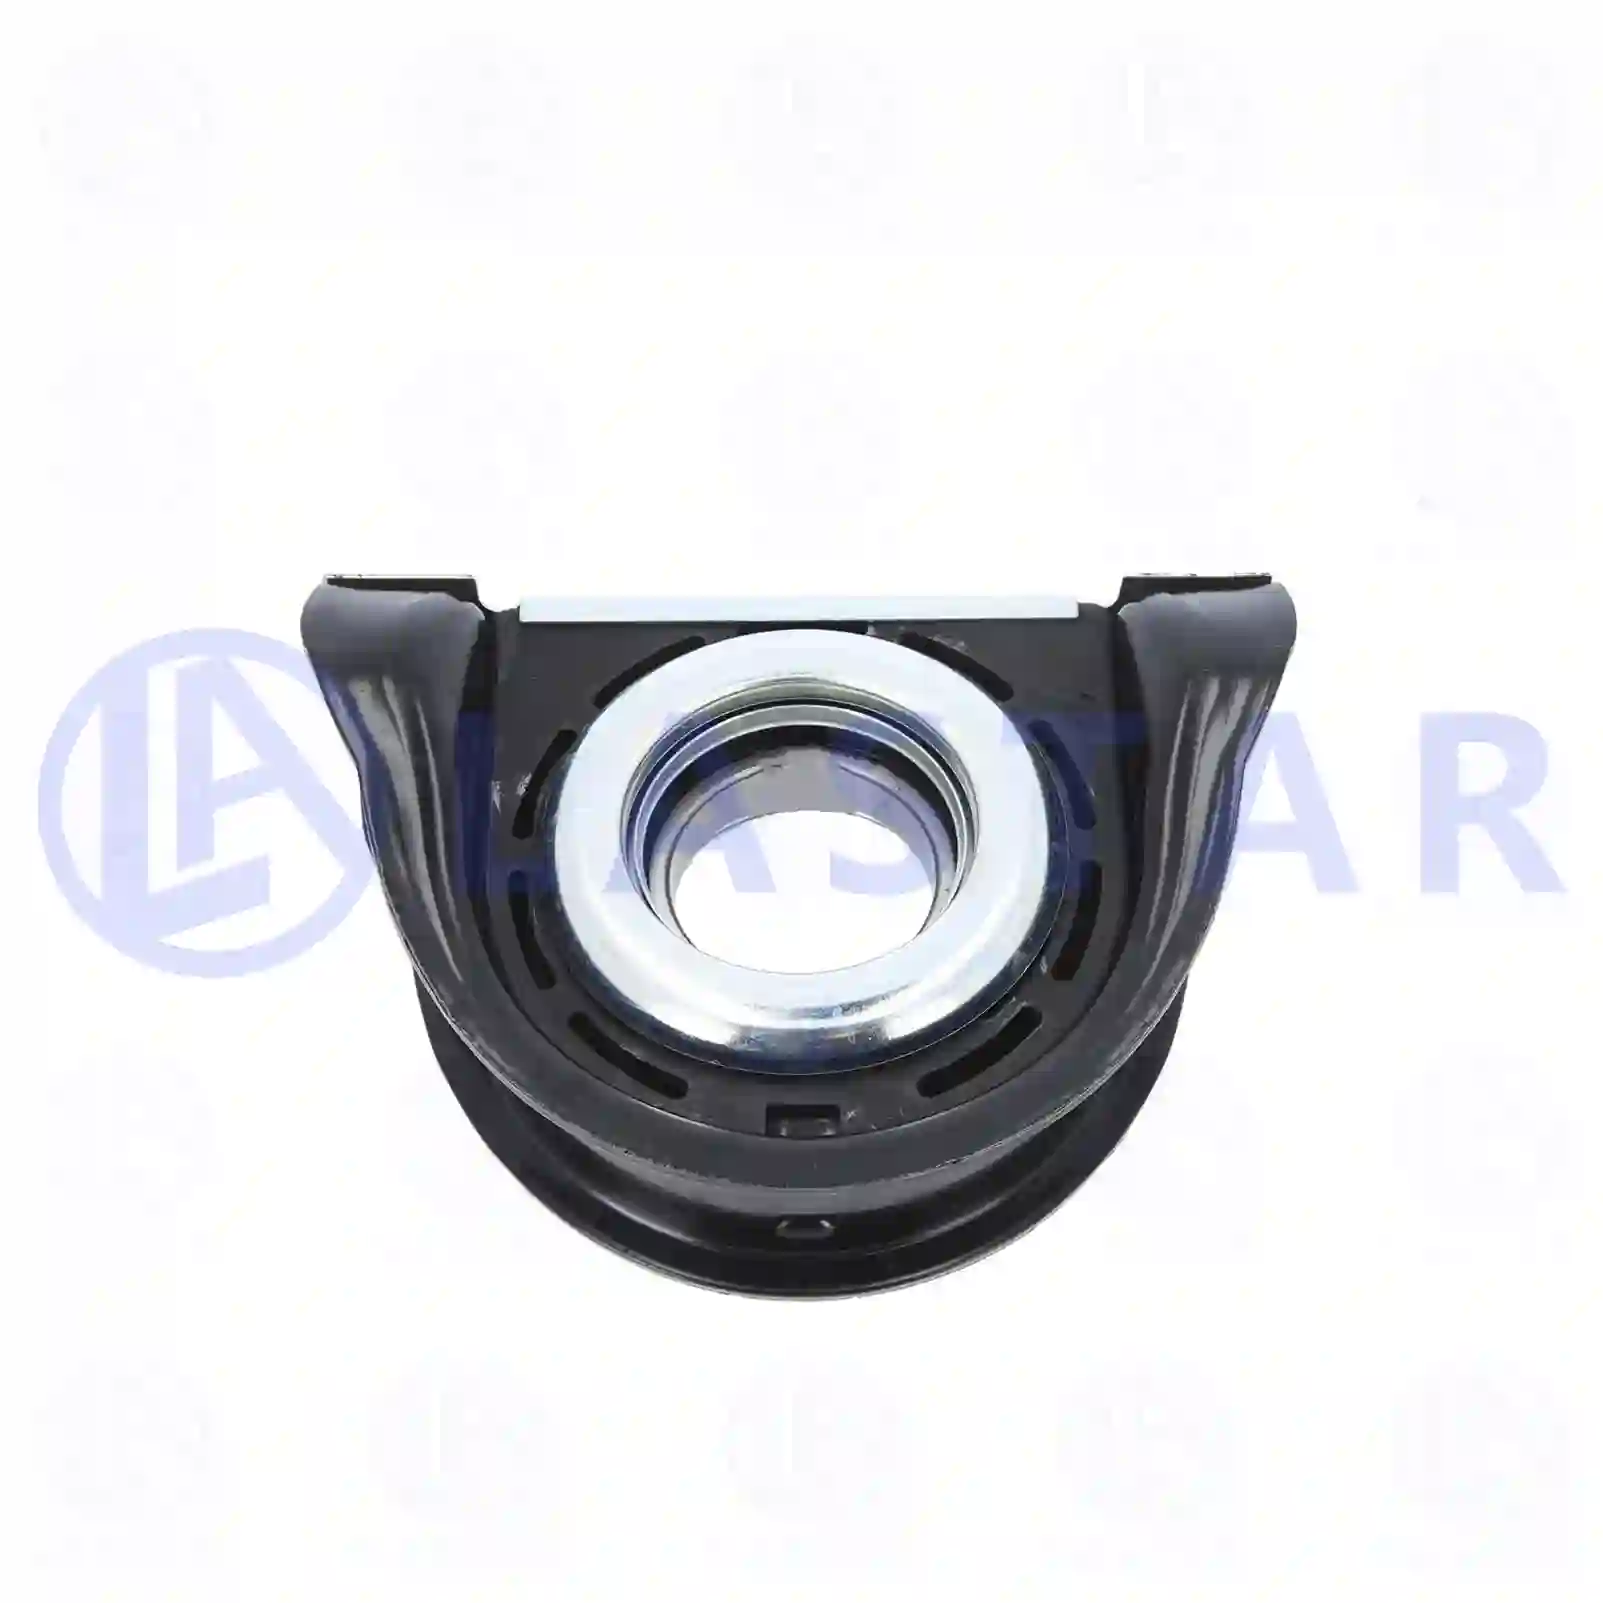 Center bearing, 77734453, 1720420 ||  77734453 Lastar Spare Part | Truck Spare Parts, Auotomotive Spare Parts Center bearing, 77734453, 1720420 ||  77734453 Lastar Spare Part | Truck Spare Parts, Auotomotive Spare Parts